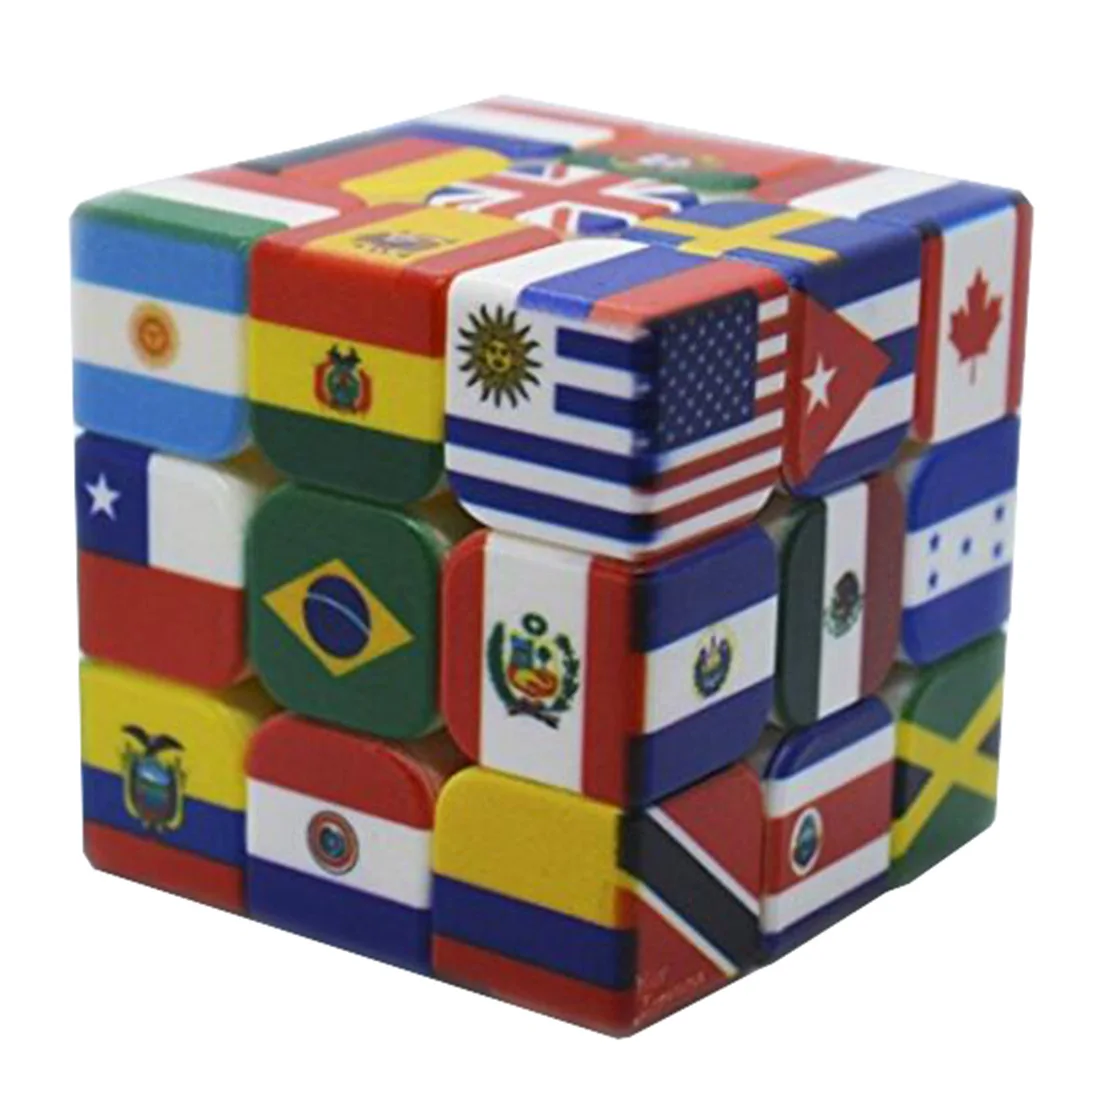 3x3x3 National Flags Magic Cube UV Print World Flags Puzzle Cube Global Earth Maps Mark Magico Cubo 3x3 For Children